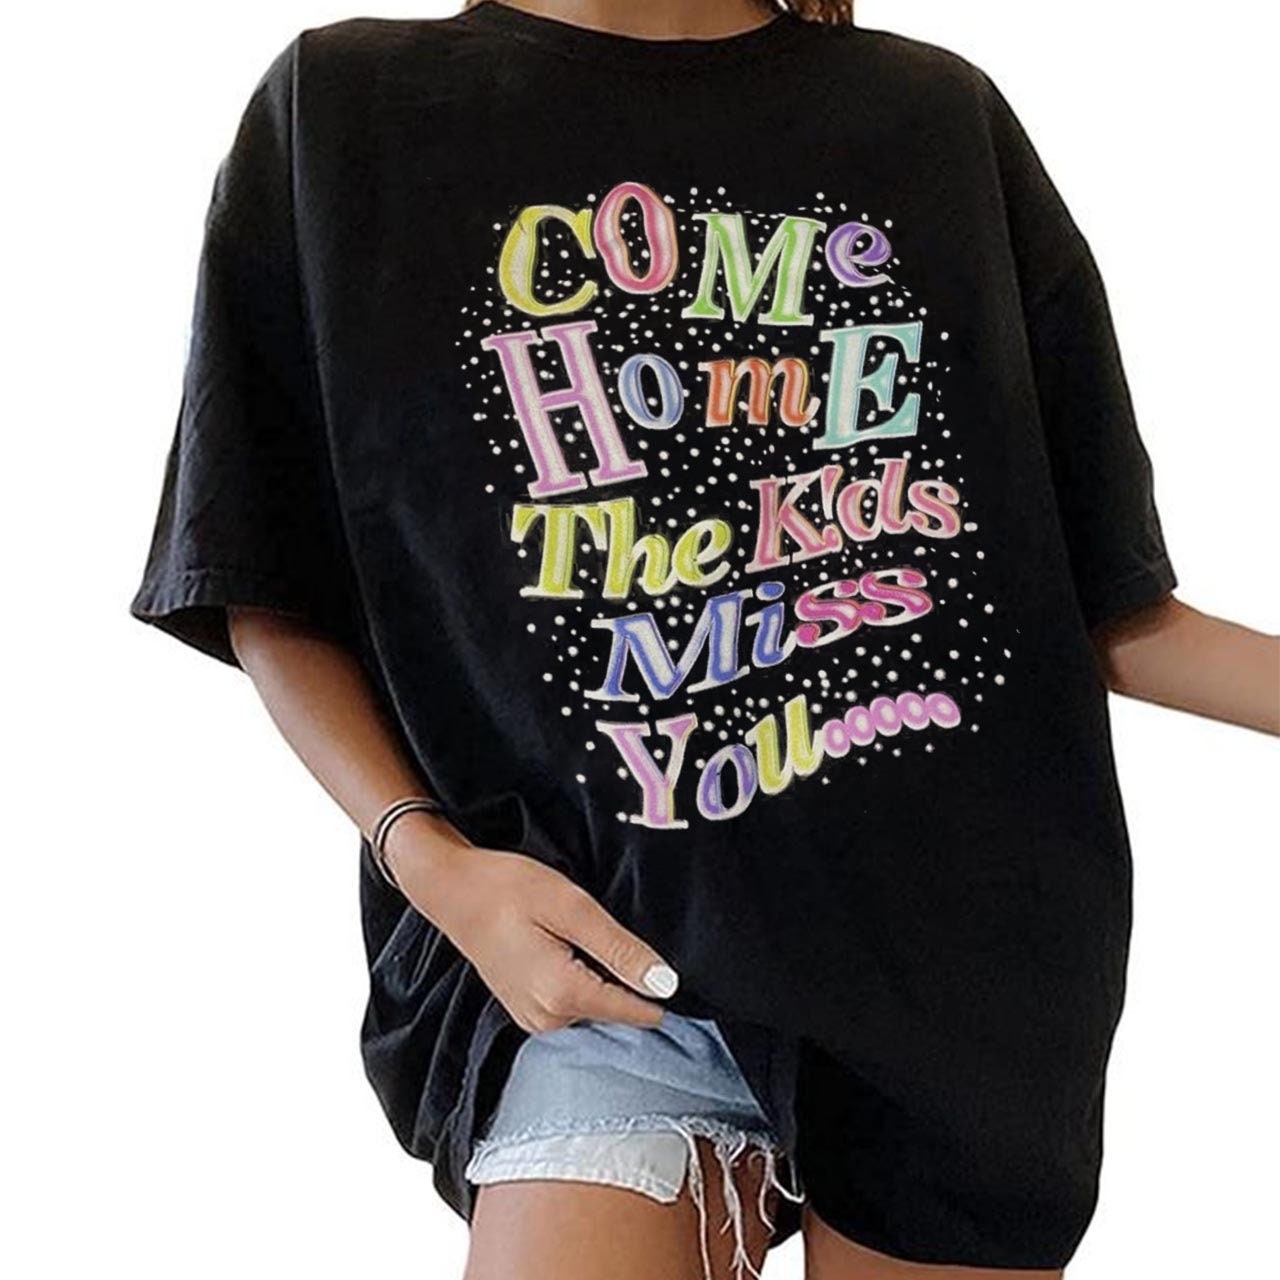 Come Home The Kids Miss You Graphic Tee DZT01